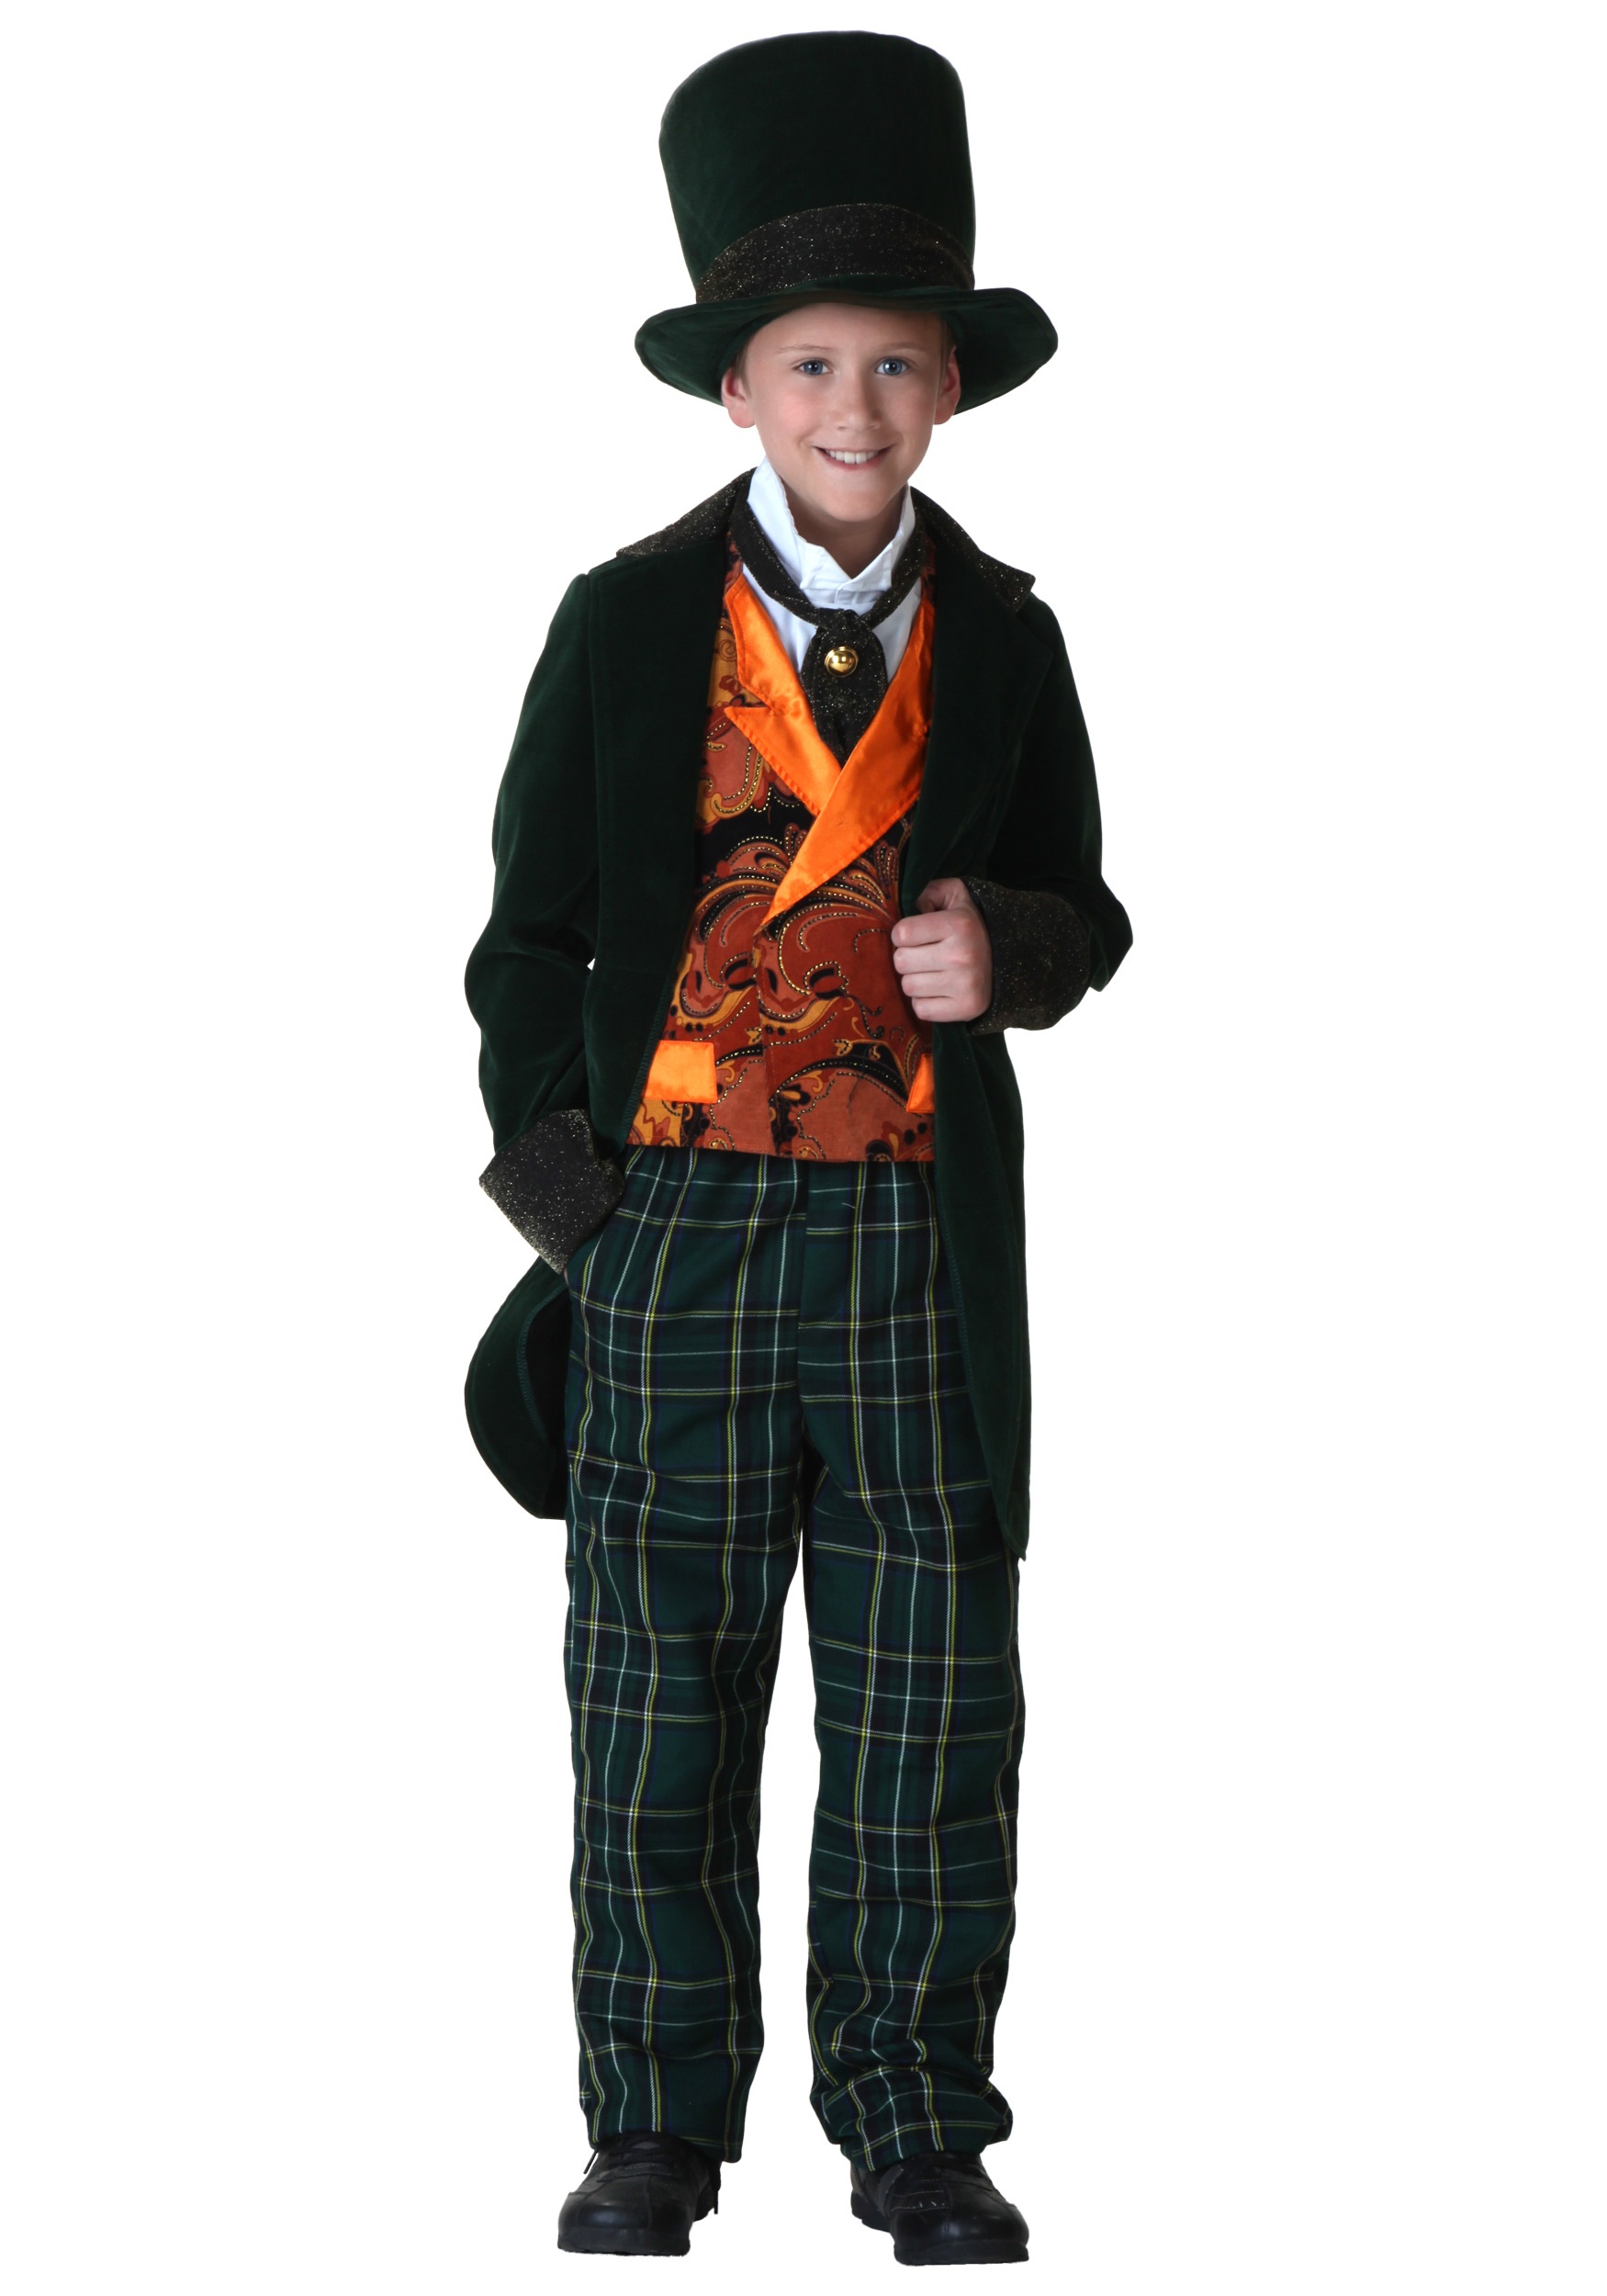 Photos - Fancy Dress Deluxe FUN Costumes  Mad Hatter Costume for Kids Green/Orange FUN1236CH 